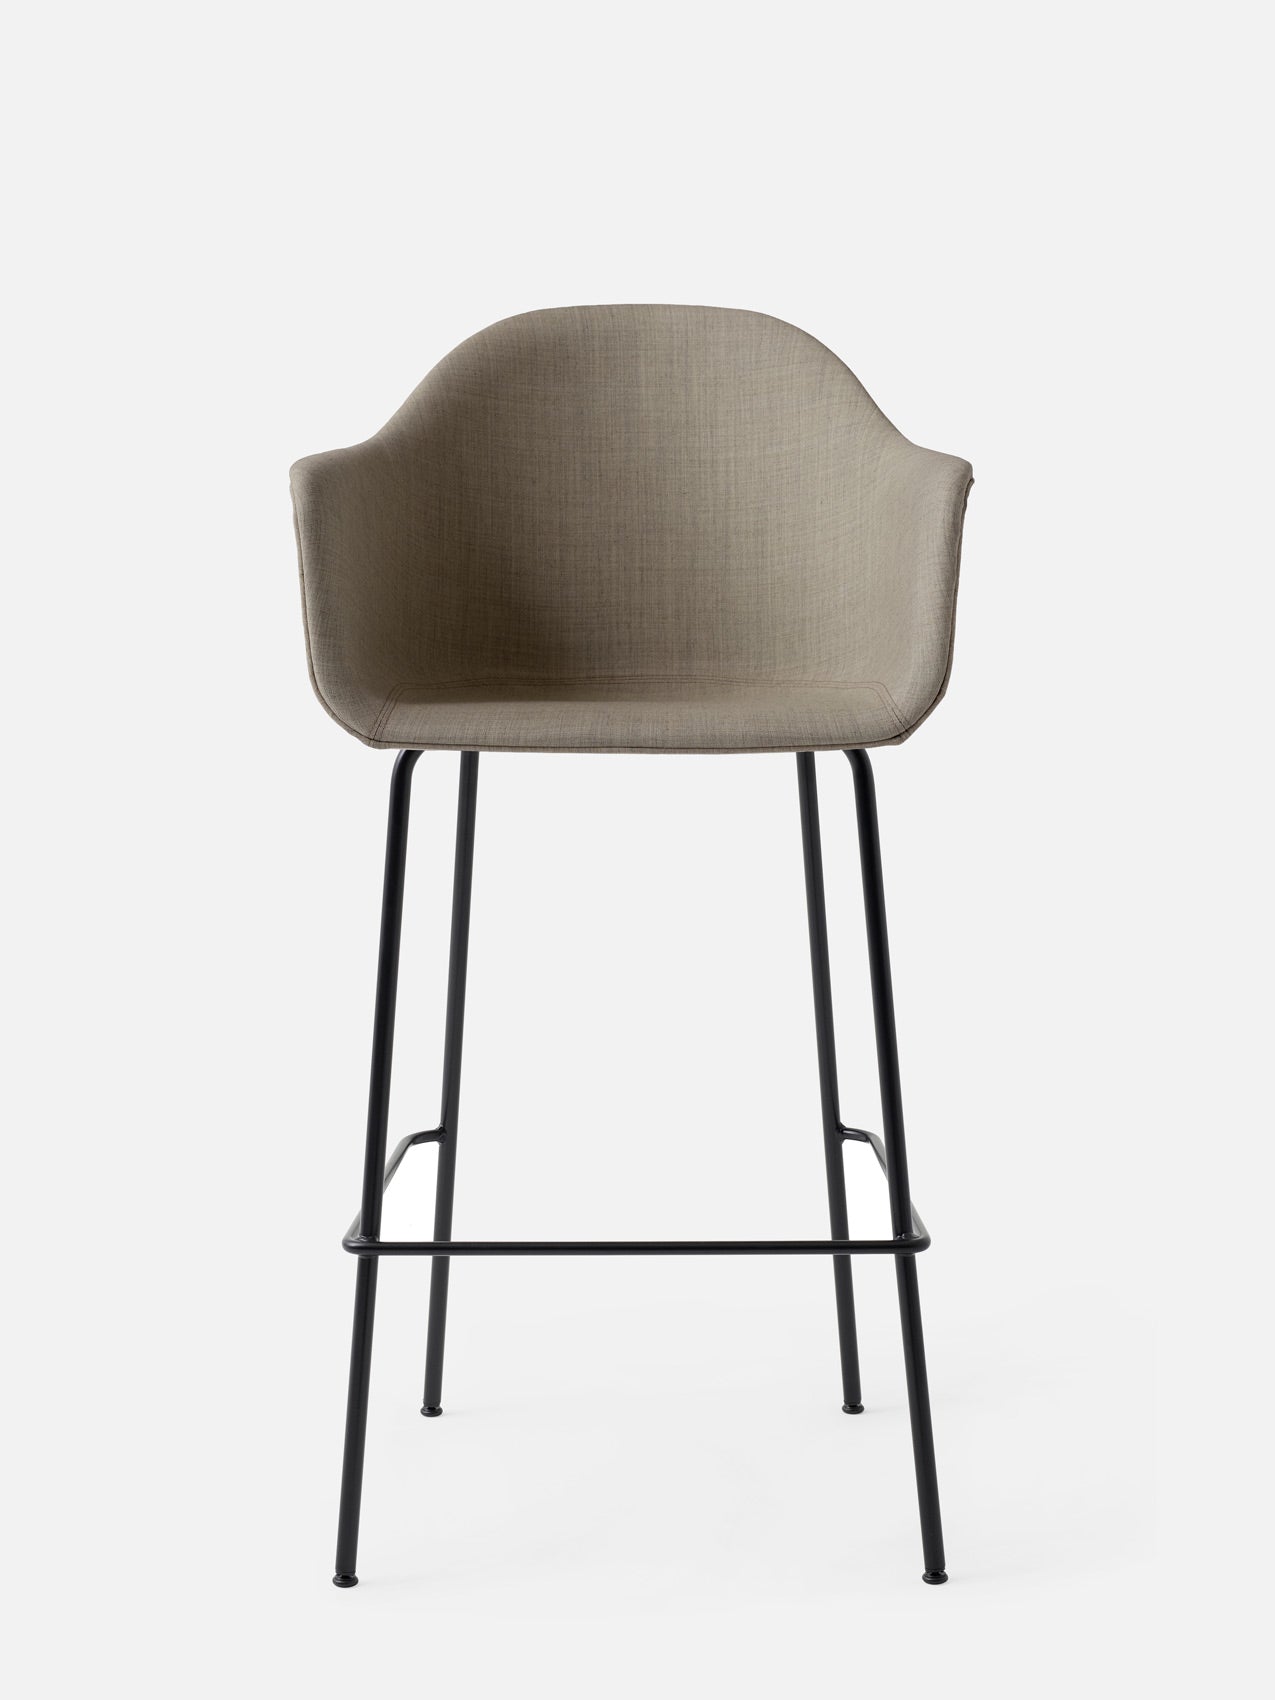 Harbour Arm Chair, Upholstered-Chair-Norm Architects-Bar Height (Seat 28.7in H)/Black Steel-233/Remix3-menu-minimalist-modern-danish-design-home-decor